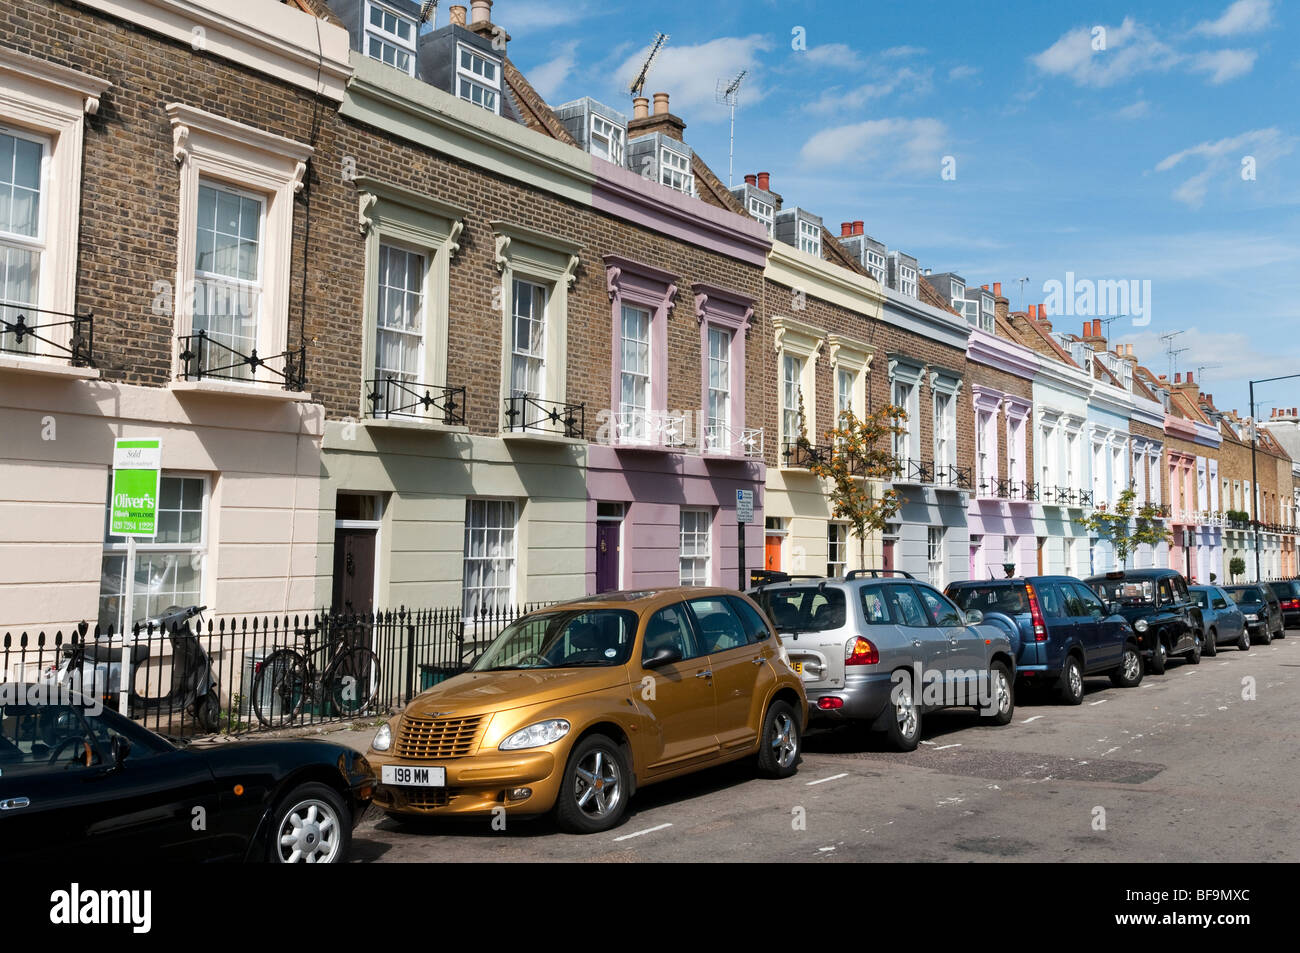 Row of colourful terraced houses on Hartland Road in Camden, London, England, UK Stock Photo